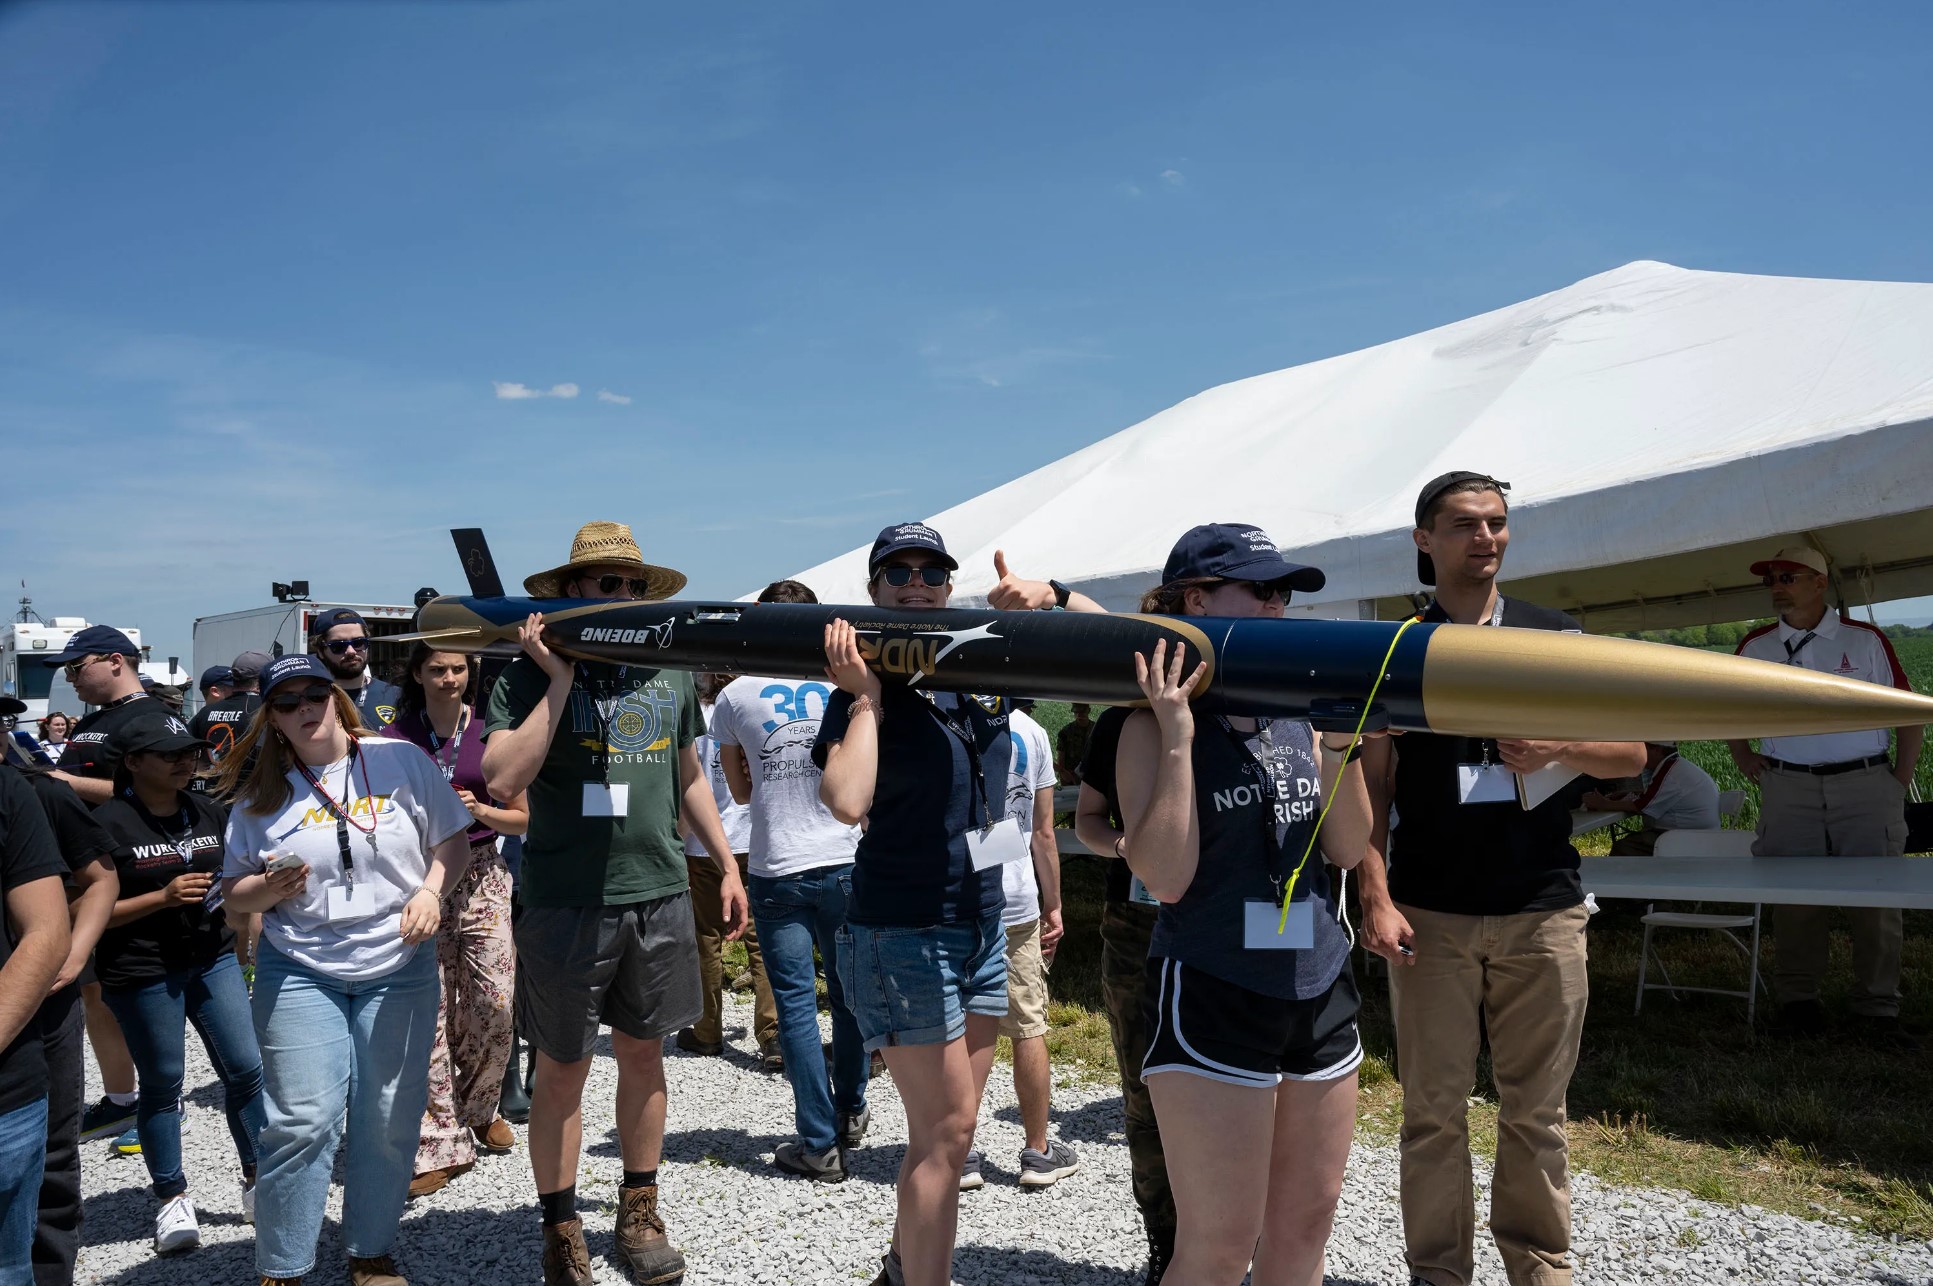 The University of Notre Dame team carries their rocket to the launch pad during the 2022 NASA Student Launch competition.